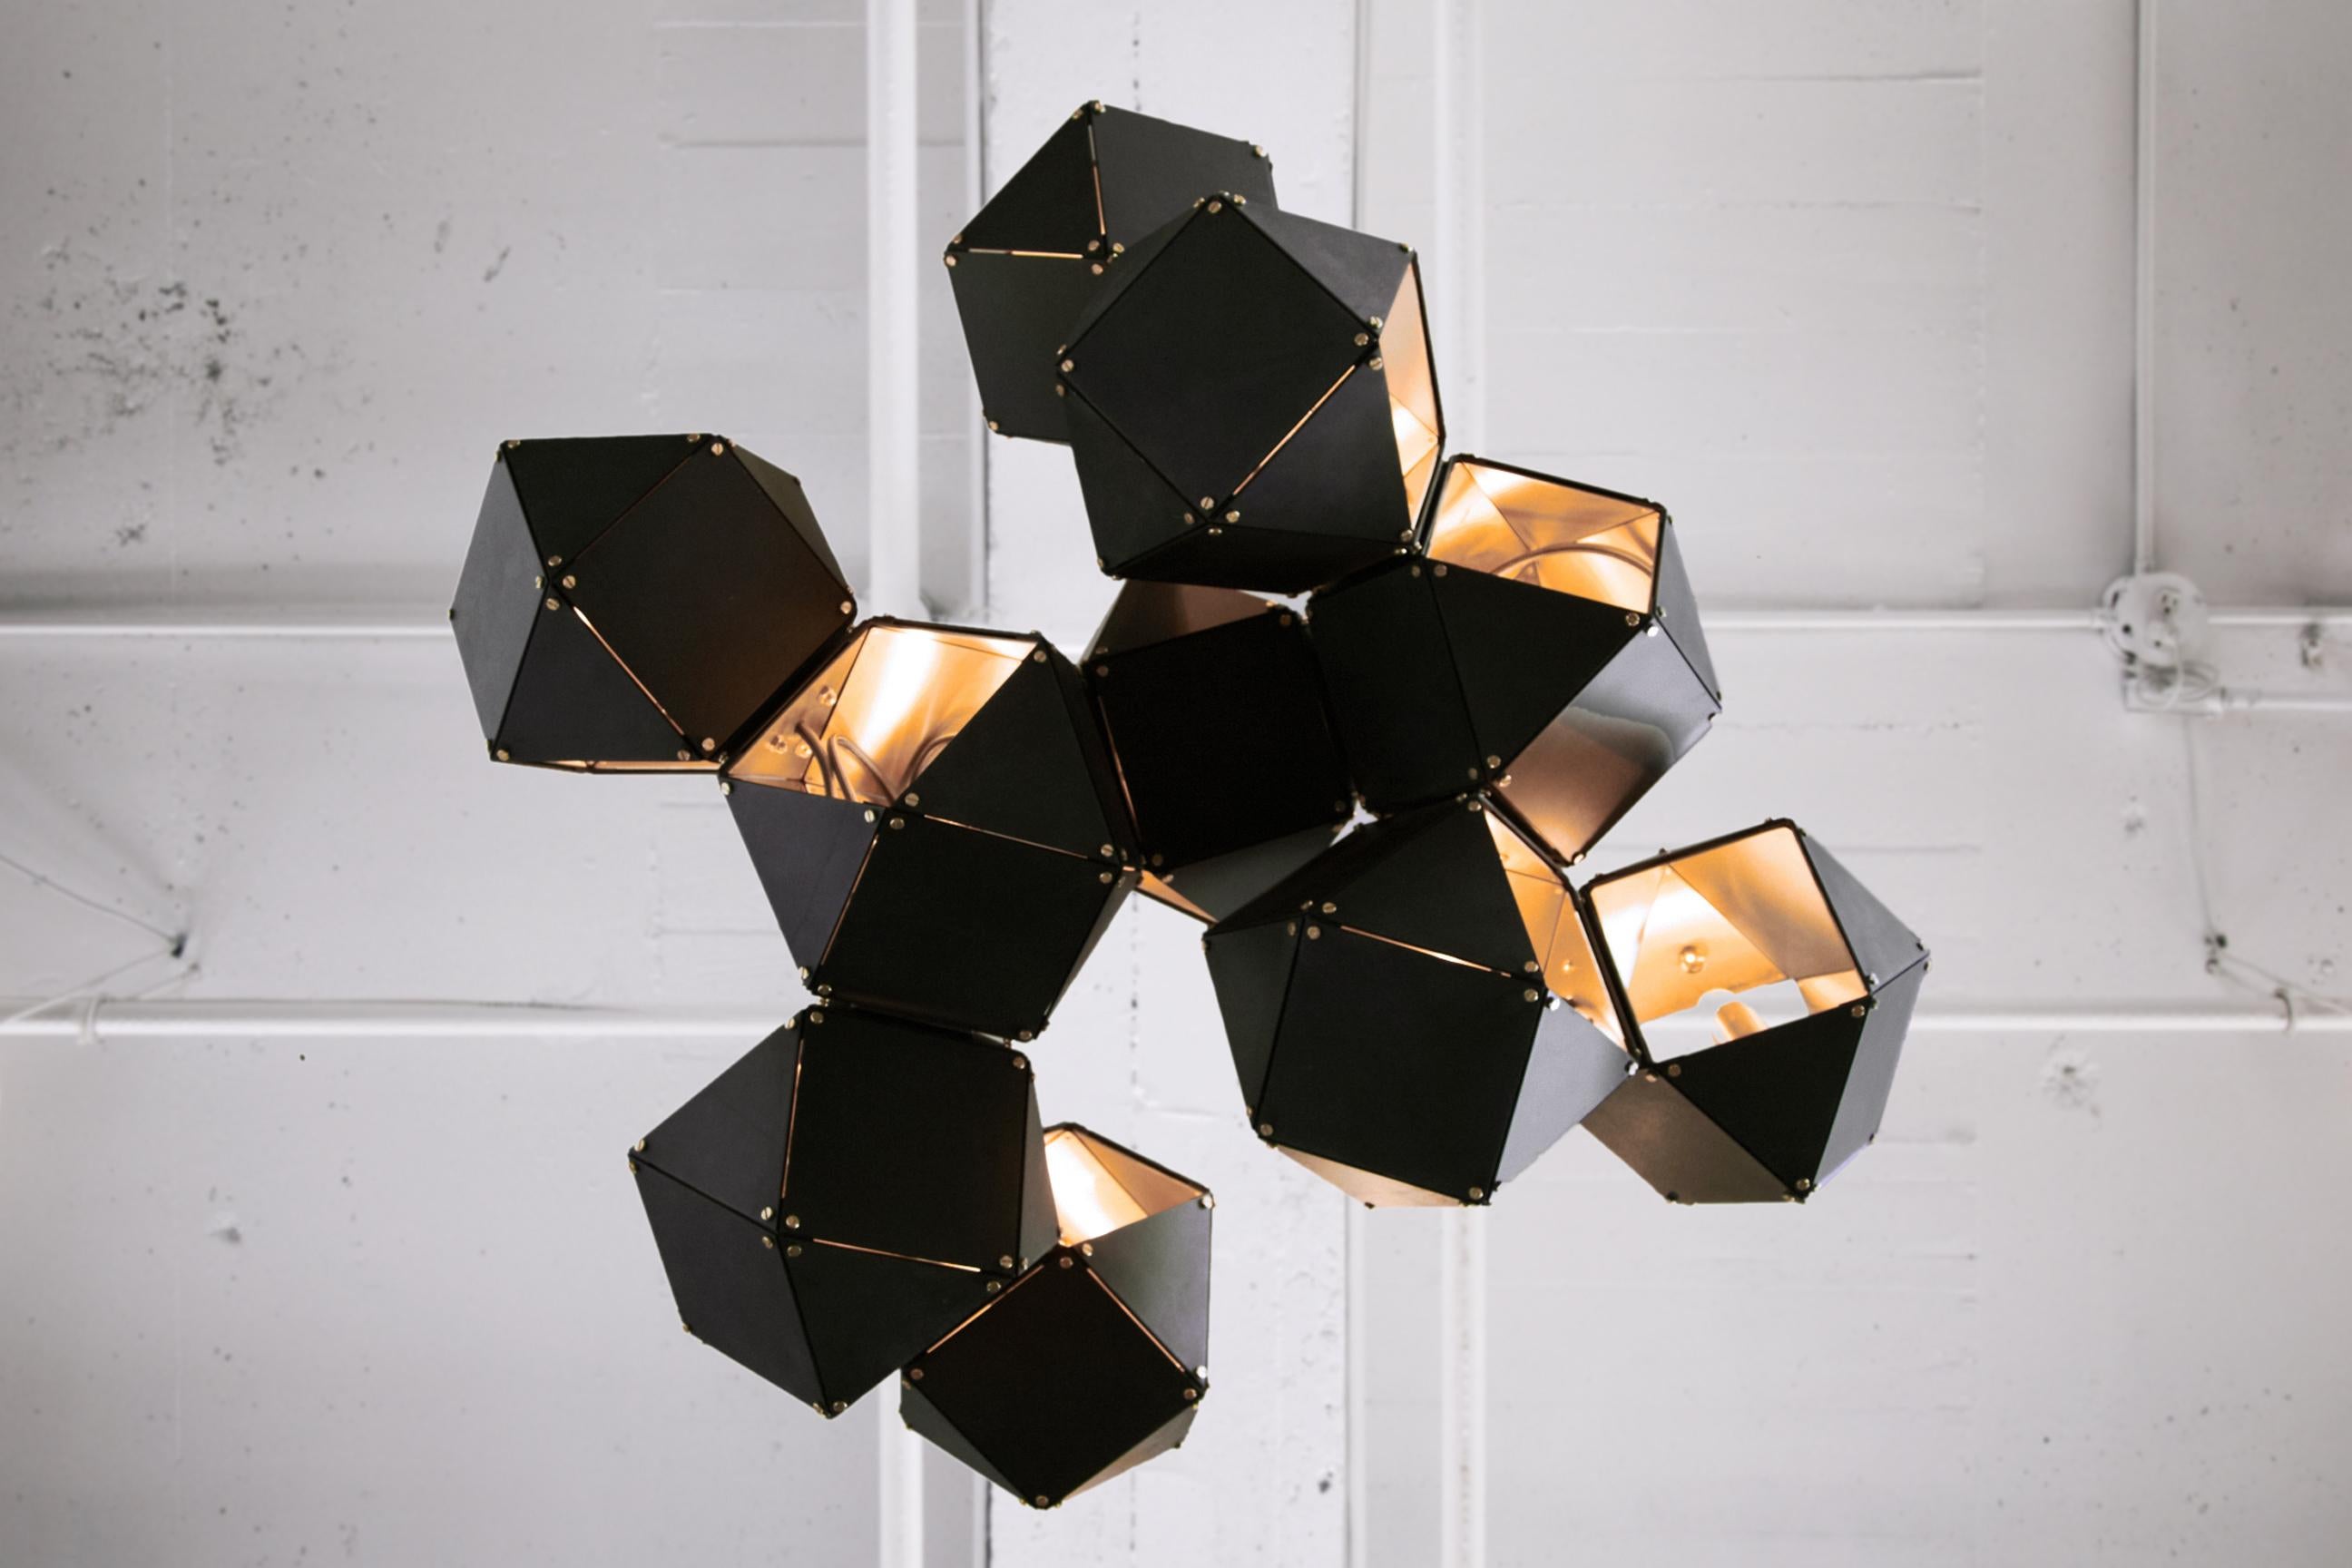 A fixture of metallic proportion, Gabriel Scott’s signature Welles is a modern piece that showcases expert artistry. Hollowed metallic polygons branch out into a modular system of interconnected configurations for a stunning optical illusion. With